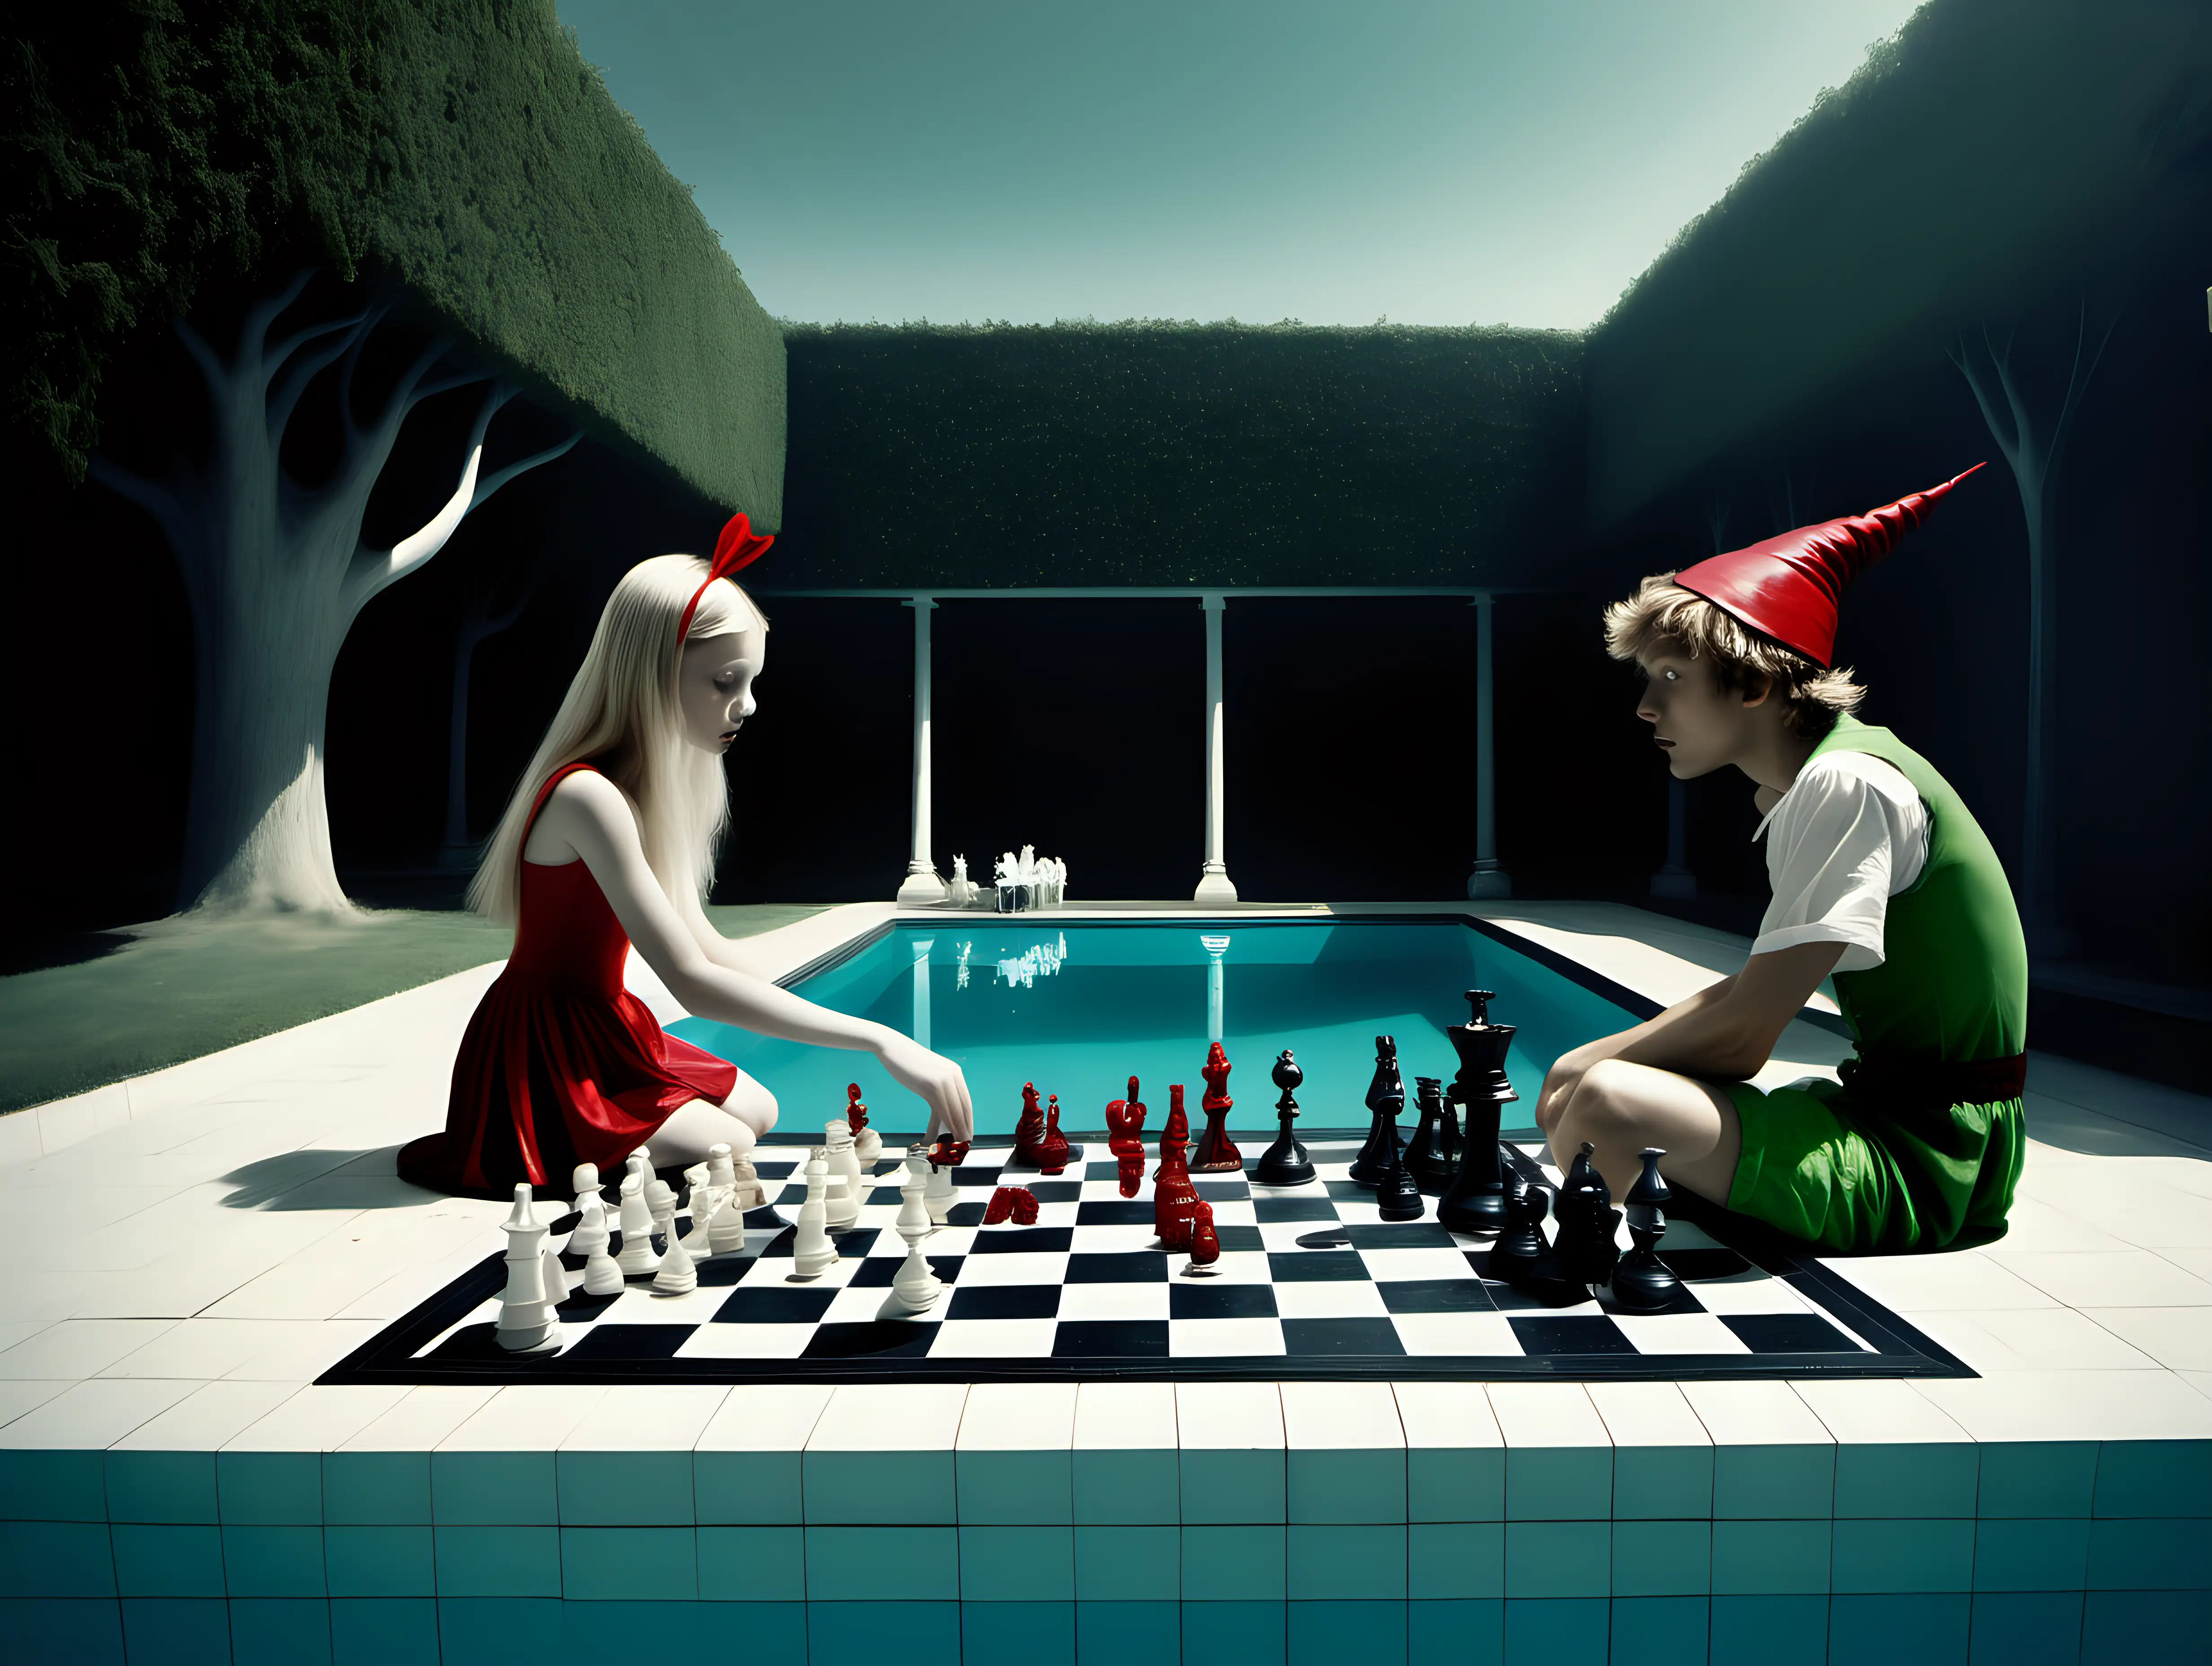 Surrealistic Chess Game in a Pool with Alice and Peter Pan